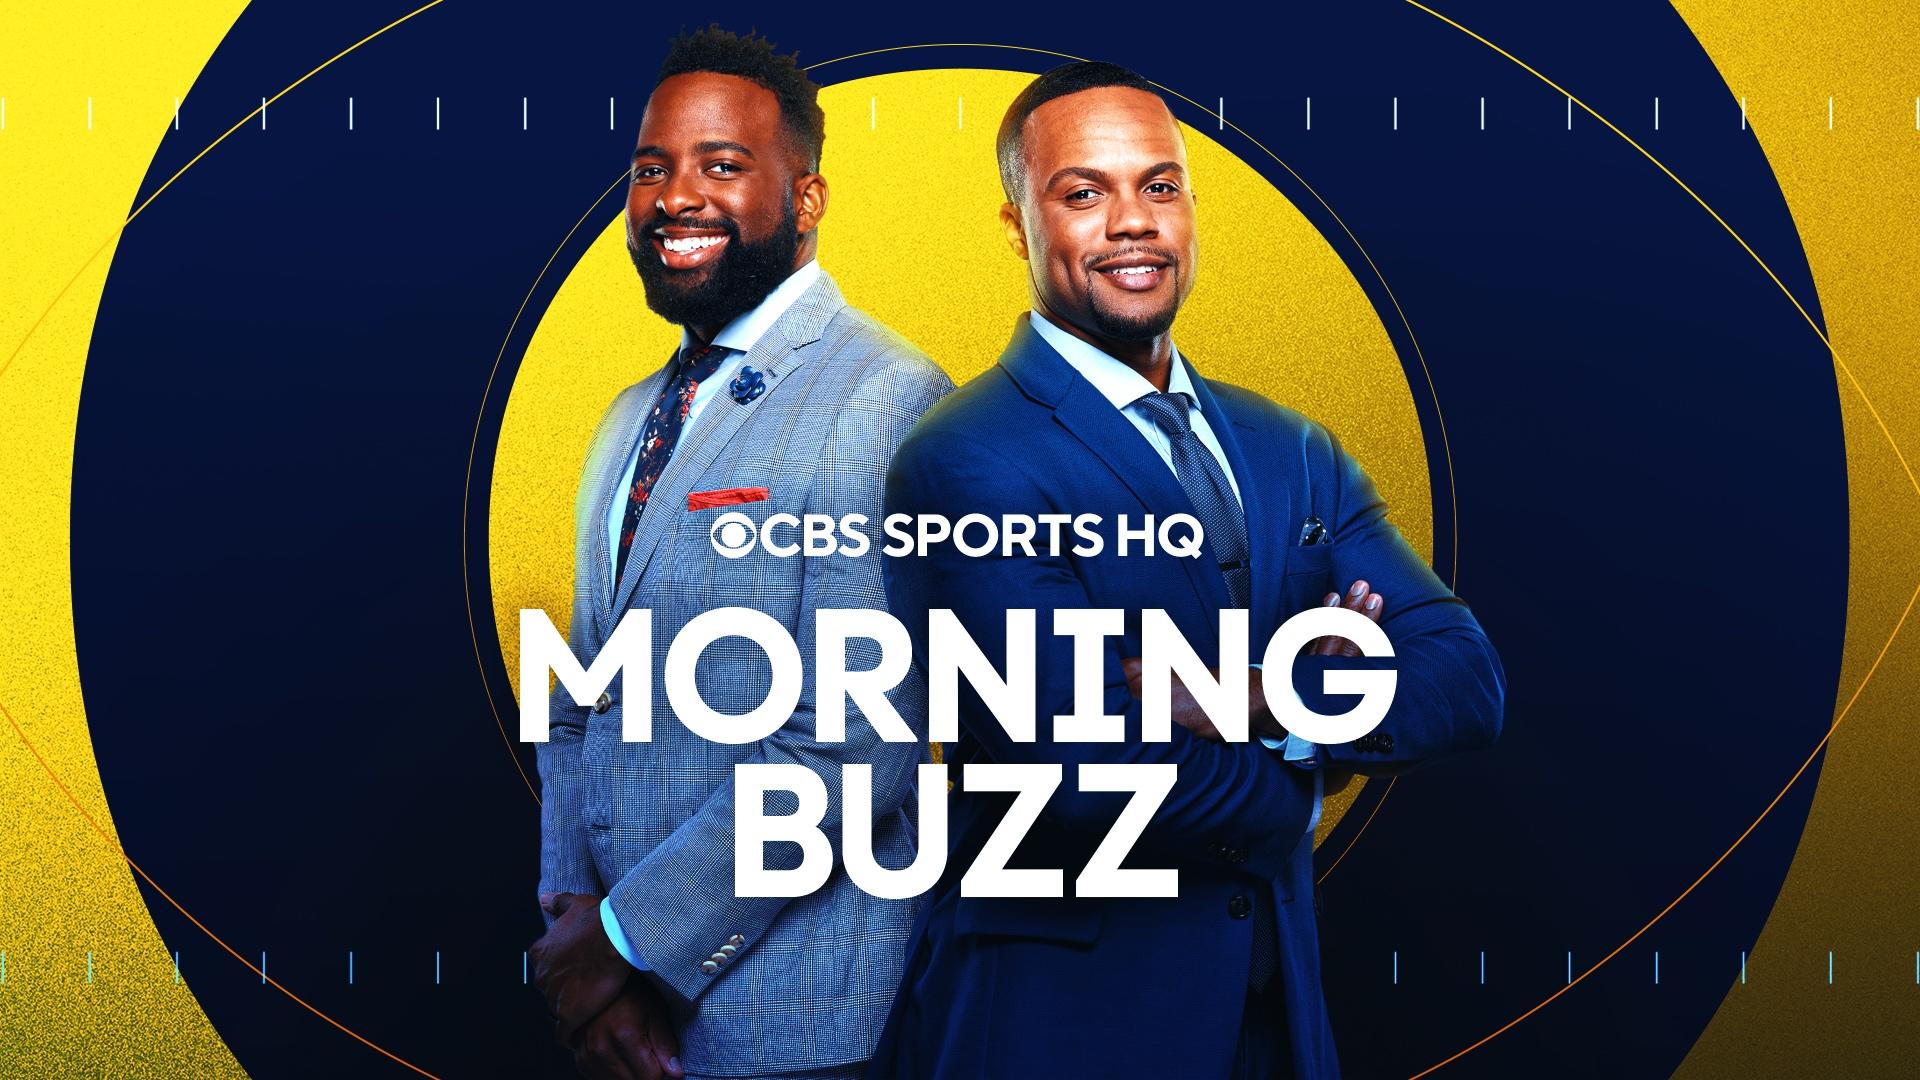 CBS Sports - News, Live Scores, Schedules, Fantasy Games, Video and more. - CBSSports.com